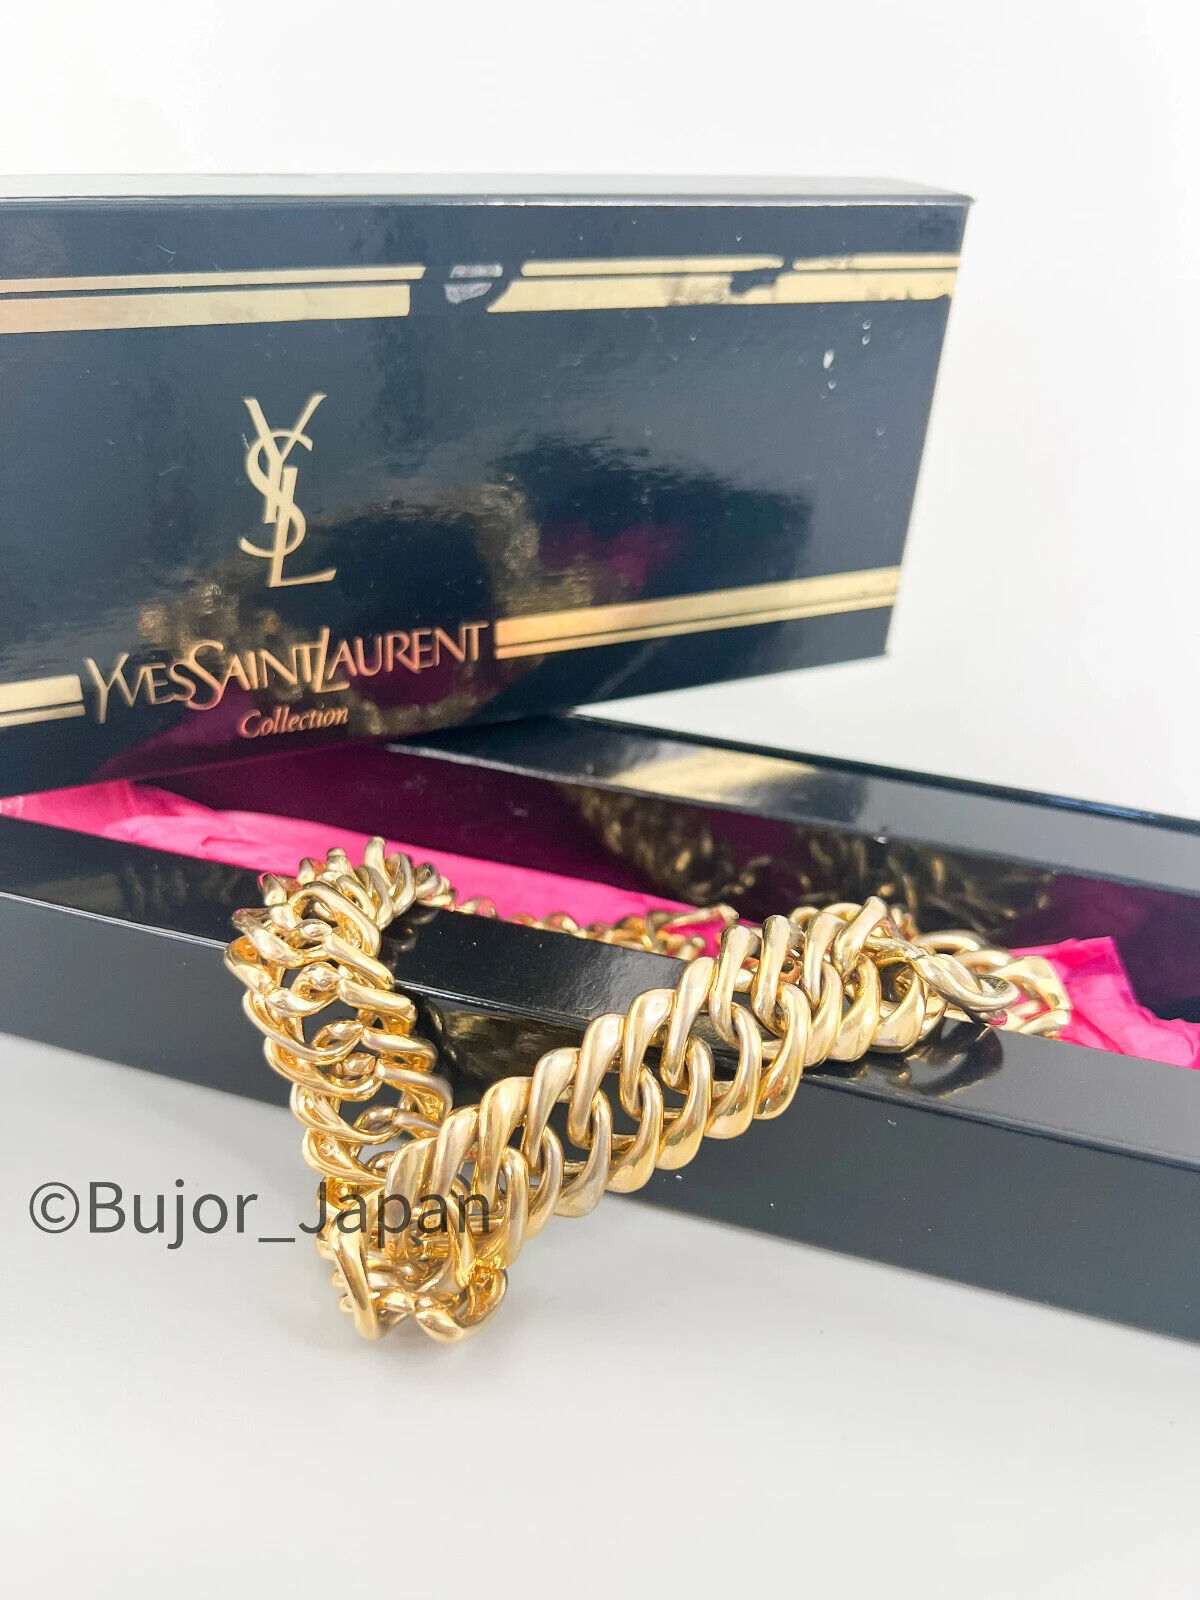 Vintage Yves Saint Laurent Choker, Gold Tone Chunky Chain Necklace, Gold Choker Necklace, unisex necklace, Gift for her, Gift for him